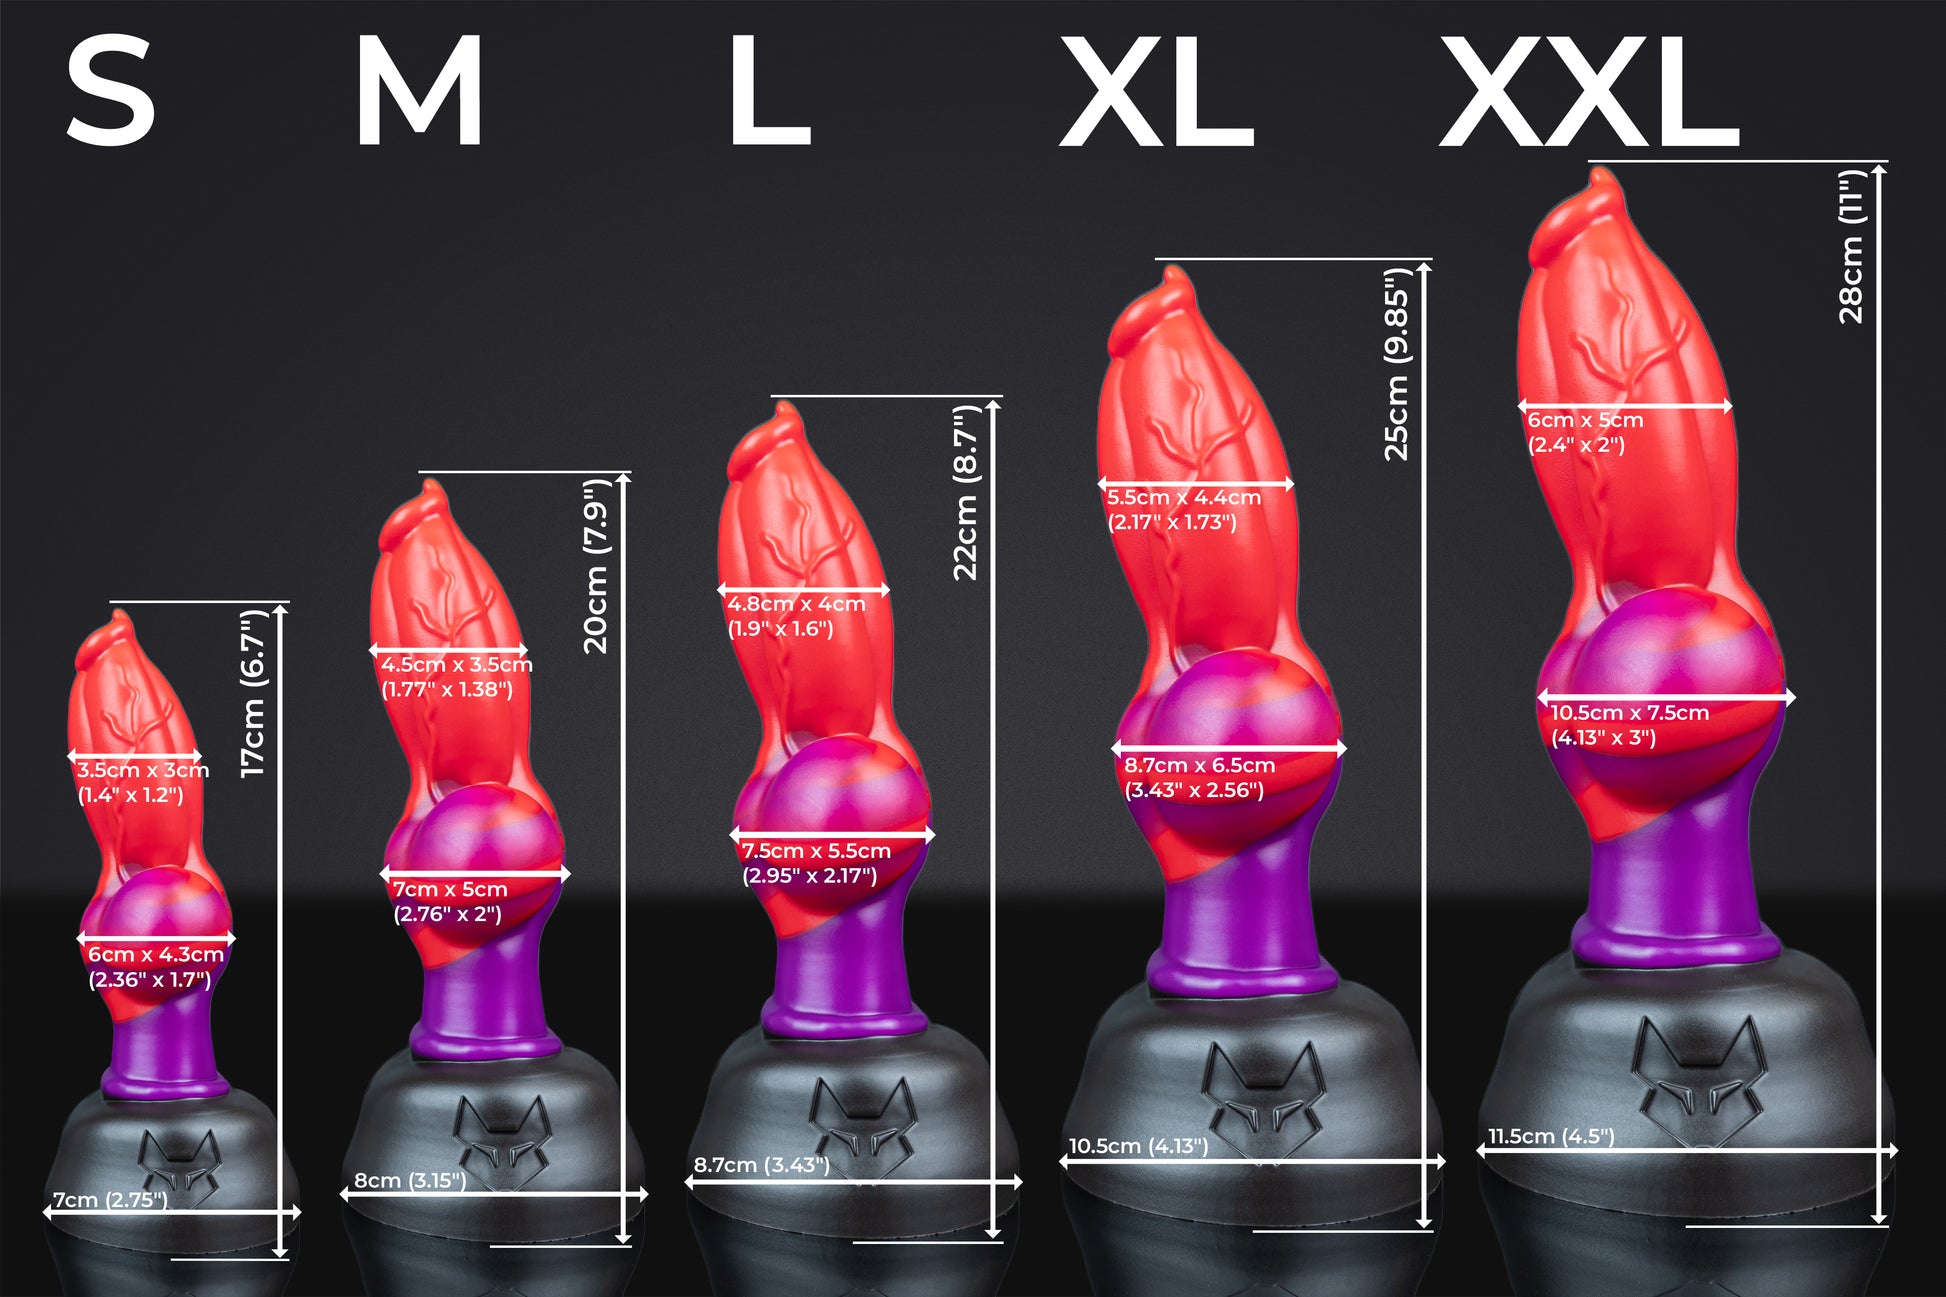 size chart of fuxi the knot dildo